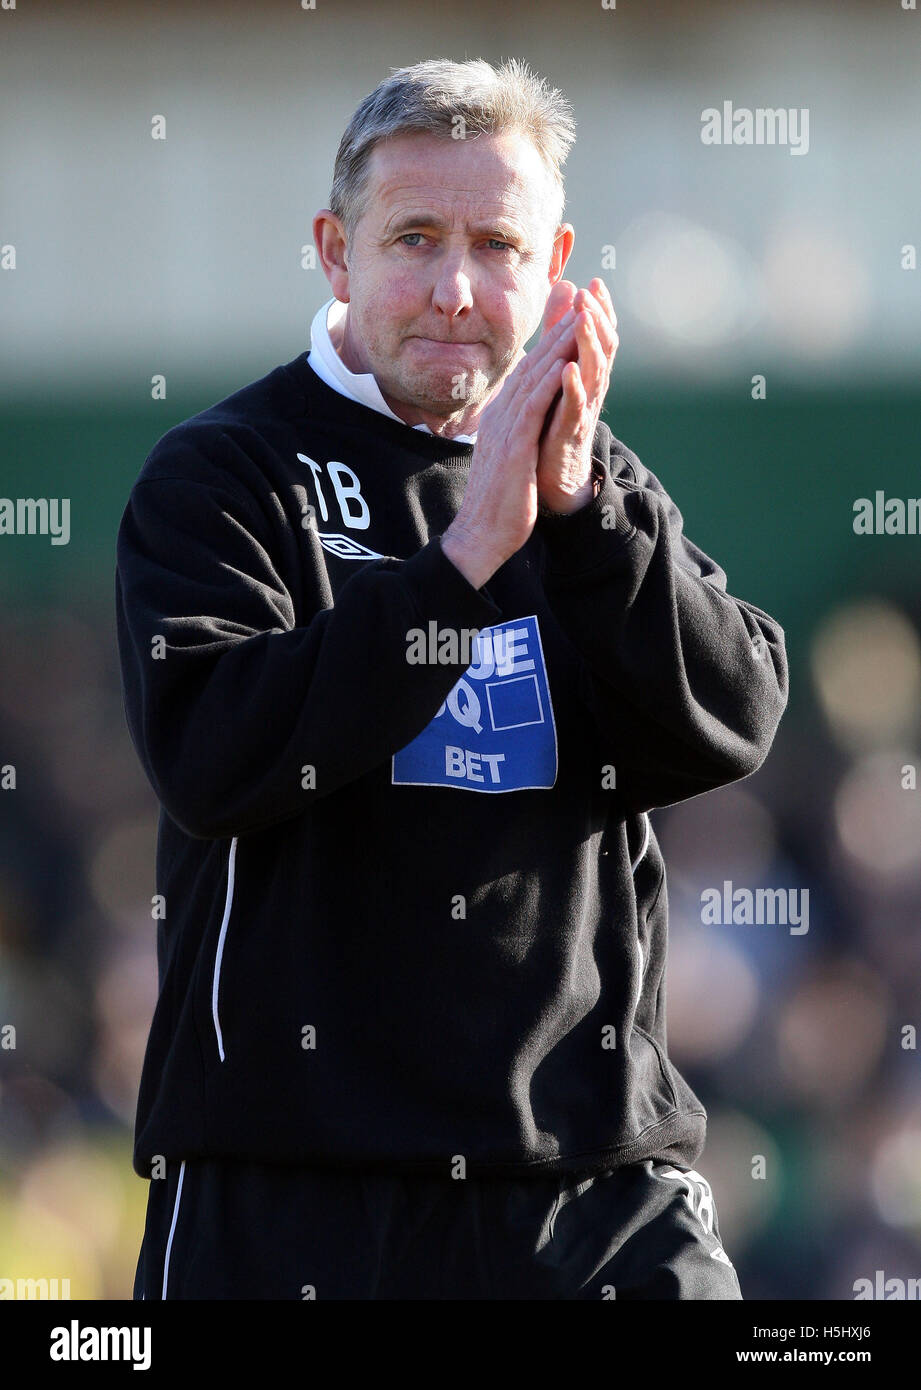 AFC Wimbledon manager Terry Brown - Thurrock vs AFC Wimbledon - Blue Square Conference South at Ship Lane, Purfleet, Essex - 21/02/09. Stock Photo